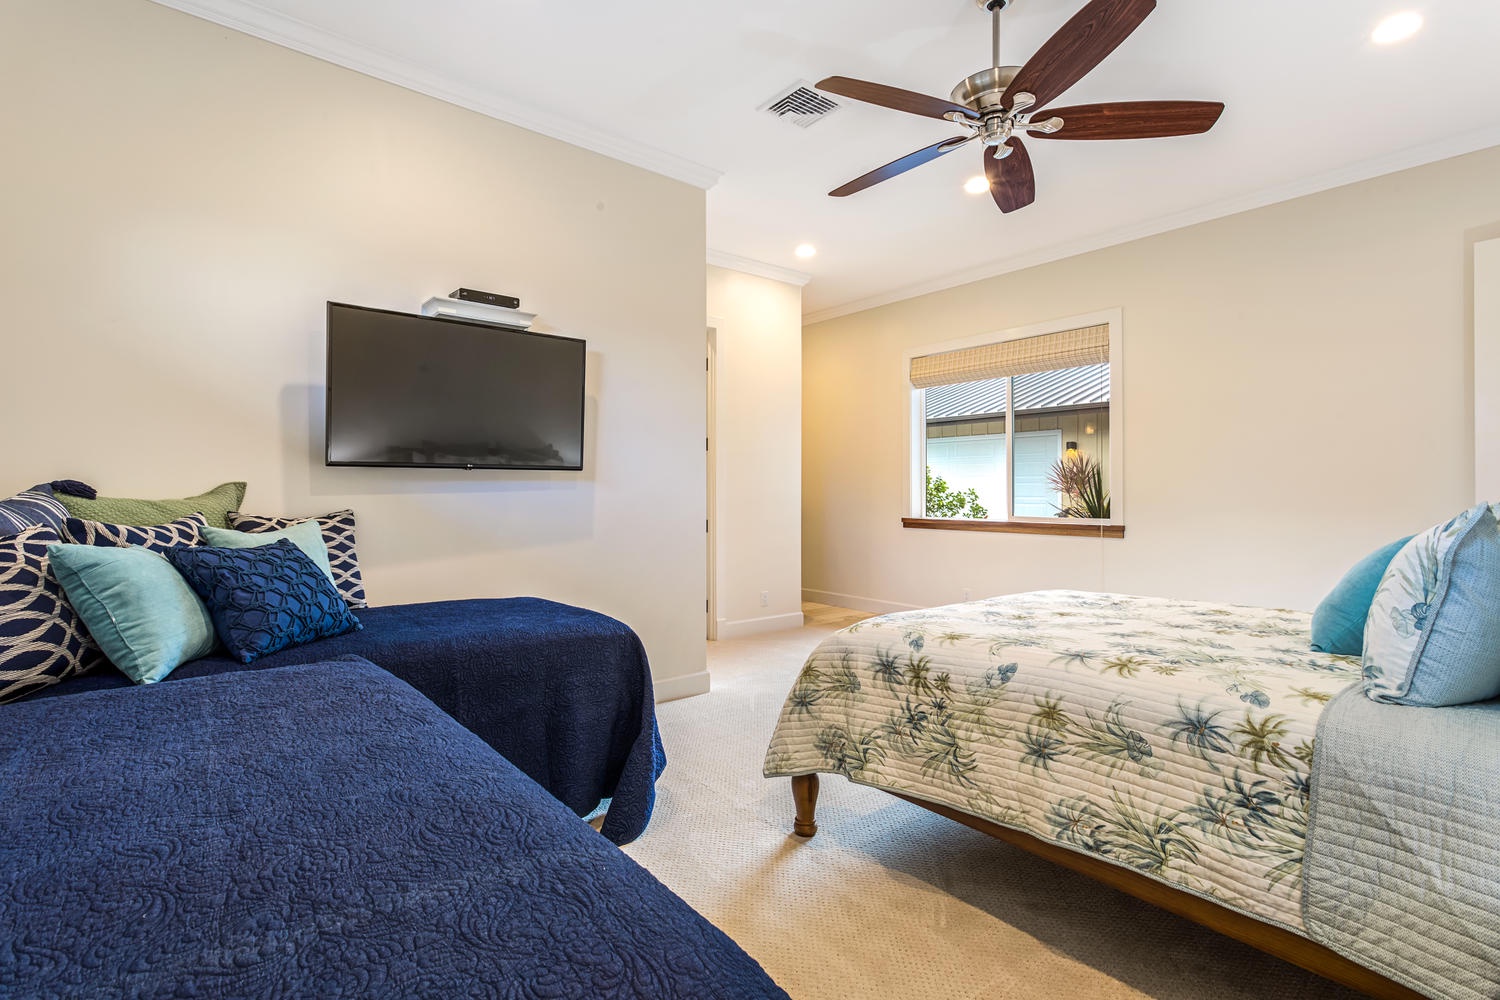 Kailua Kona Vacation Rentals, Ohana le'ale'a - Third bedroom with queen bed plus two twin beds